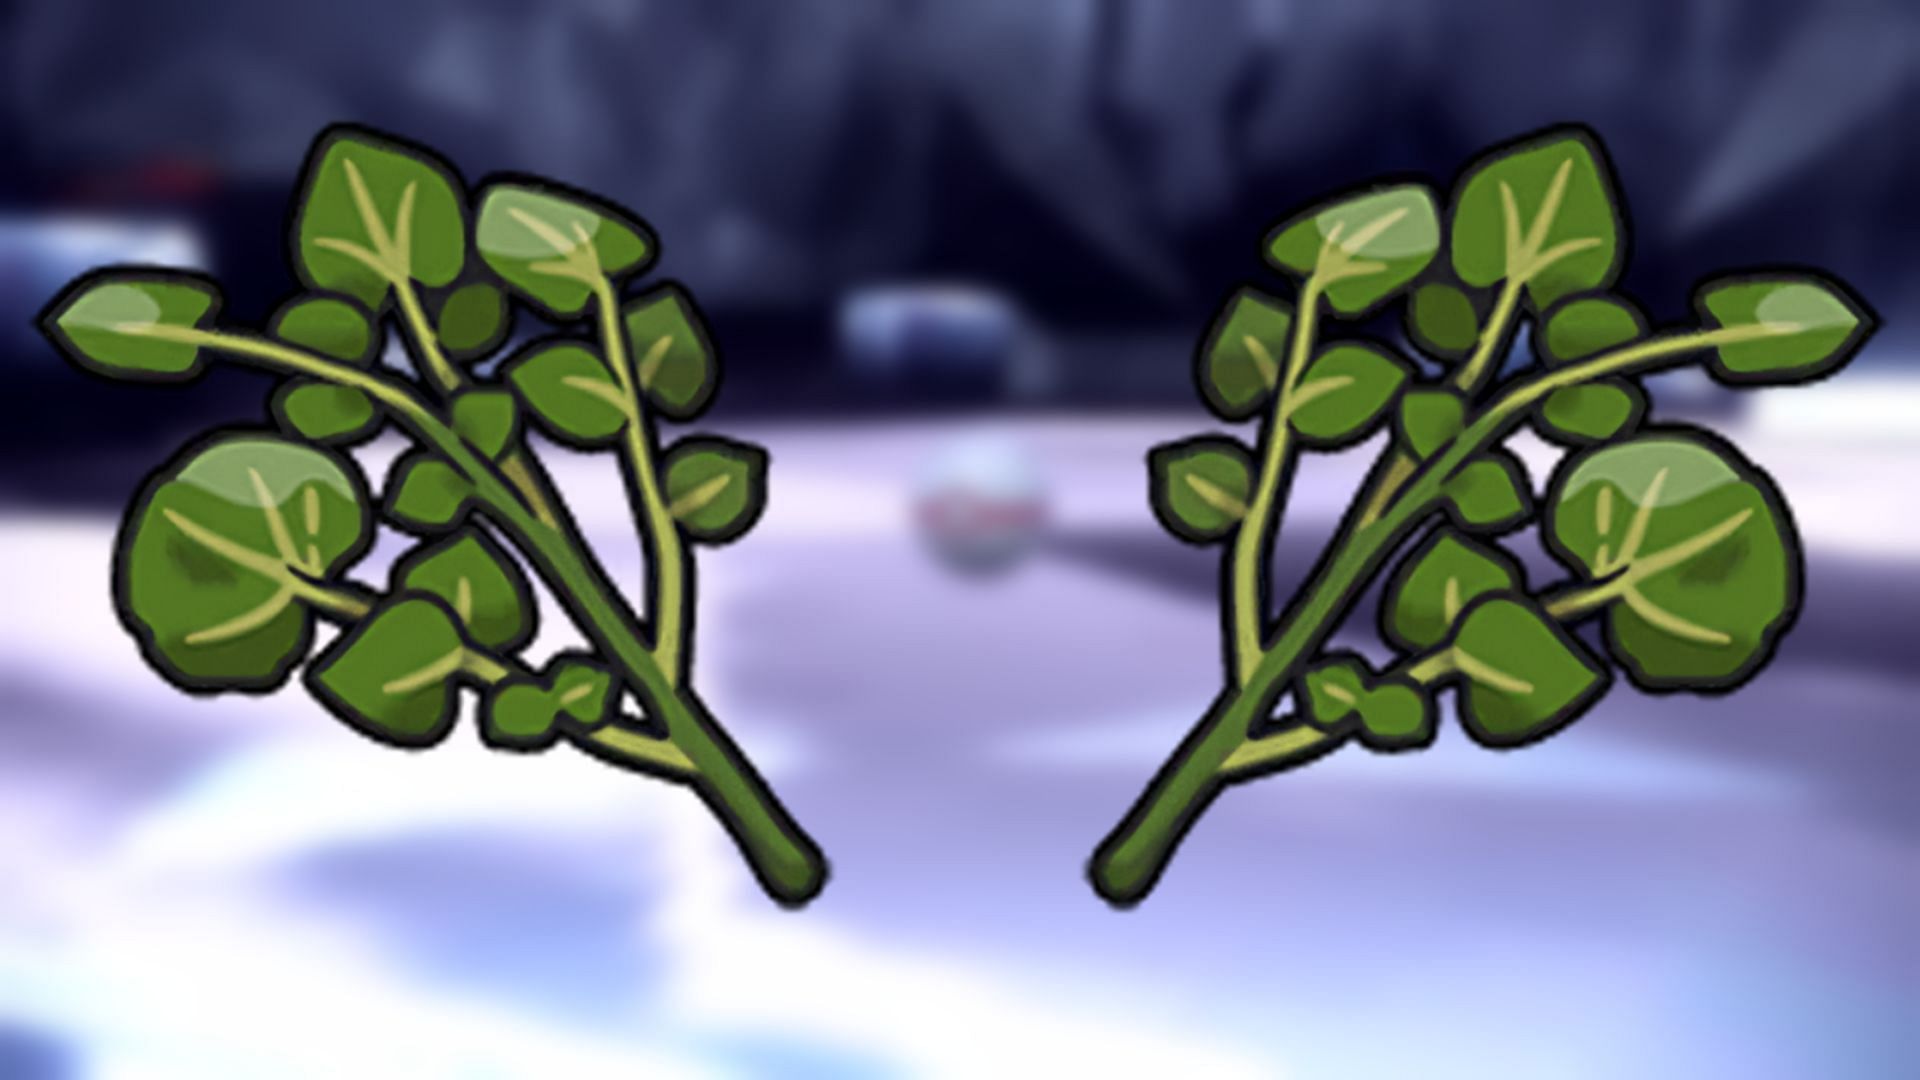 Two mirrored images of the item you